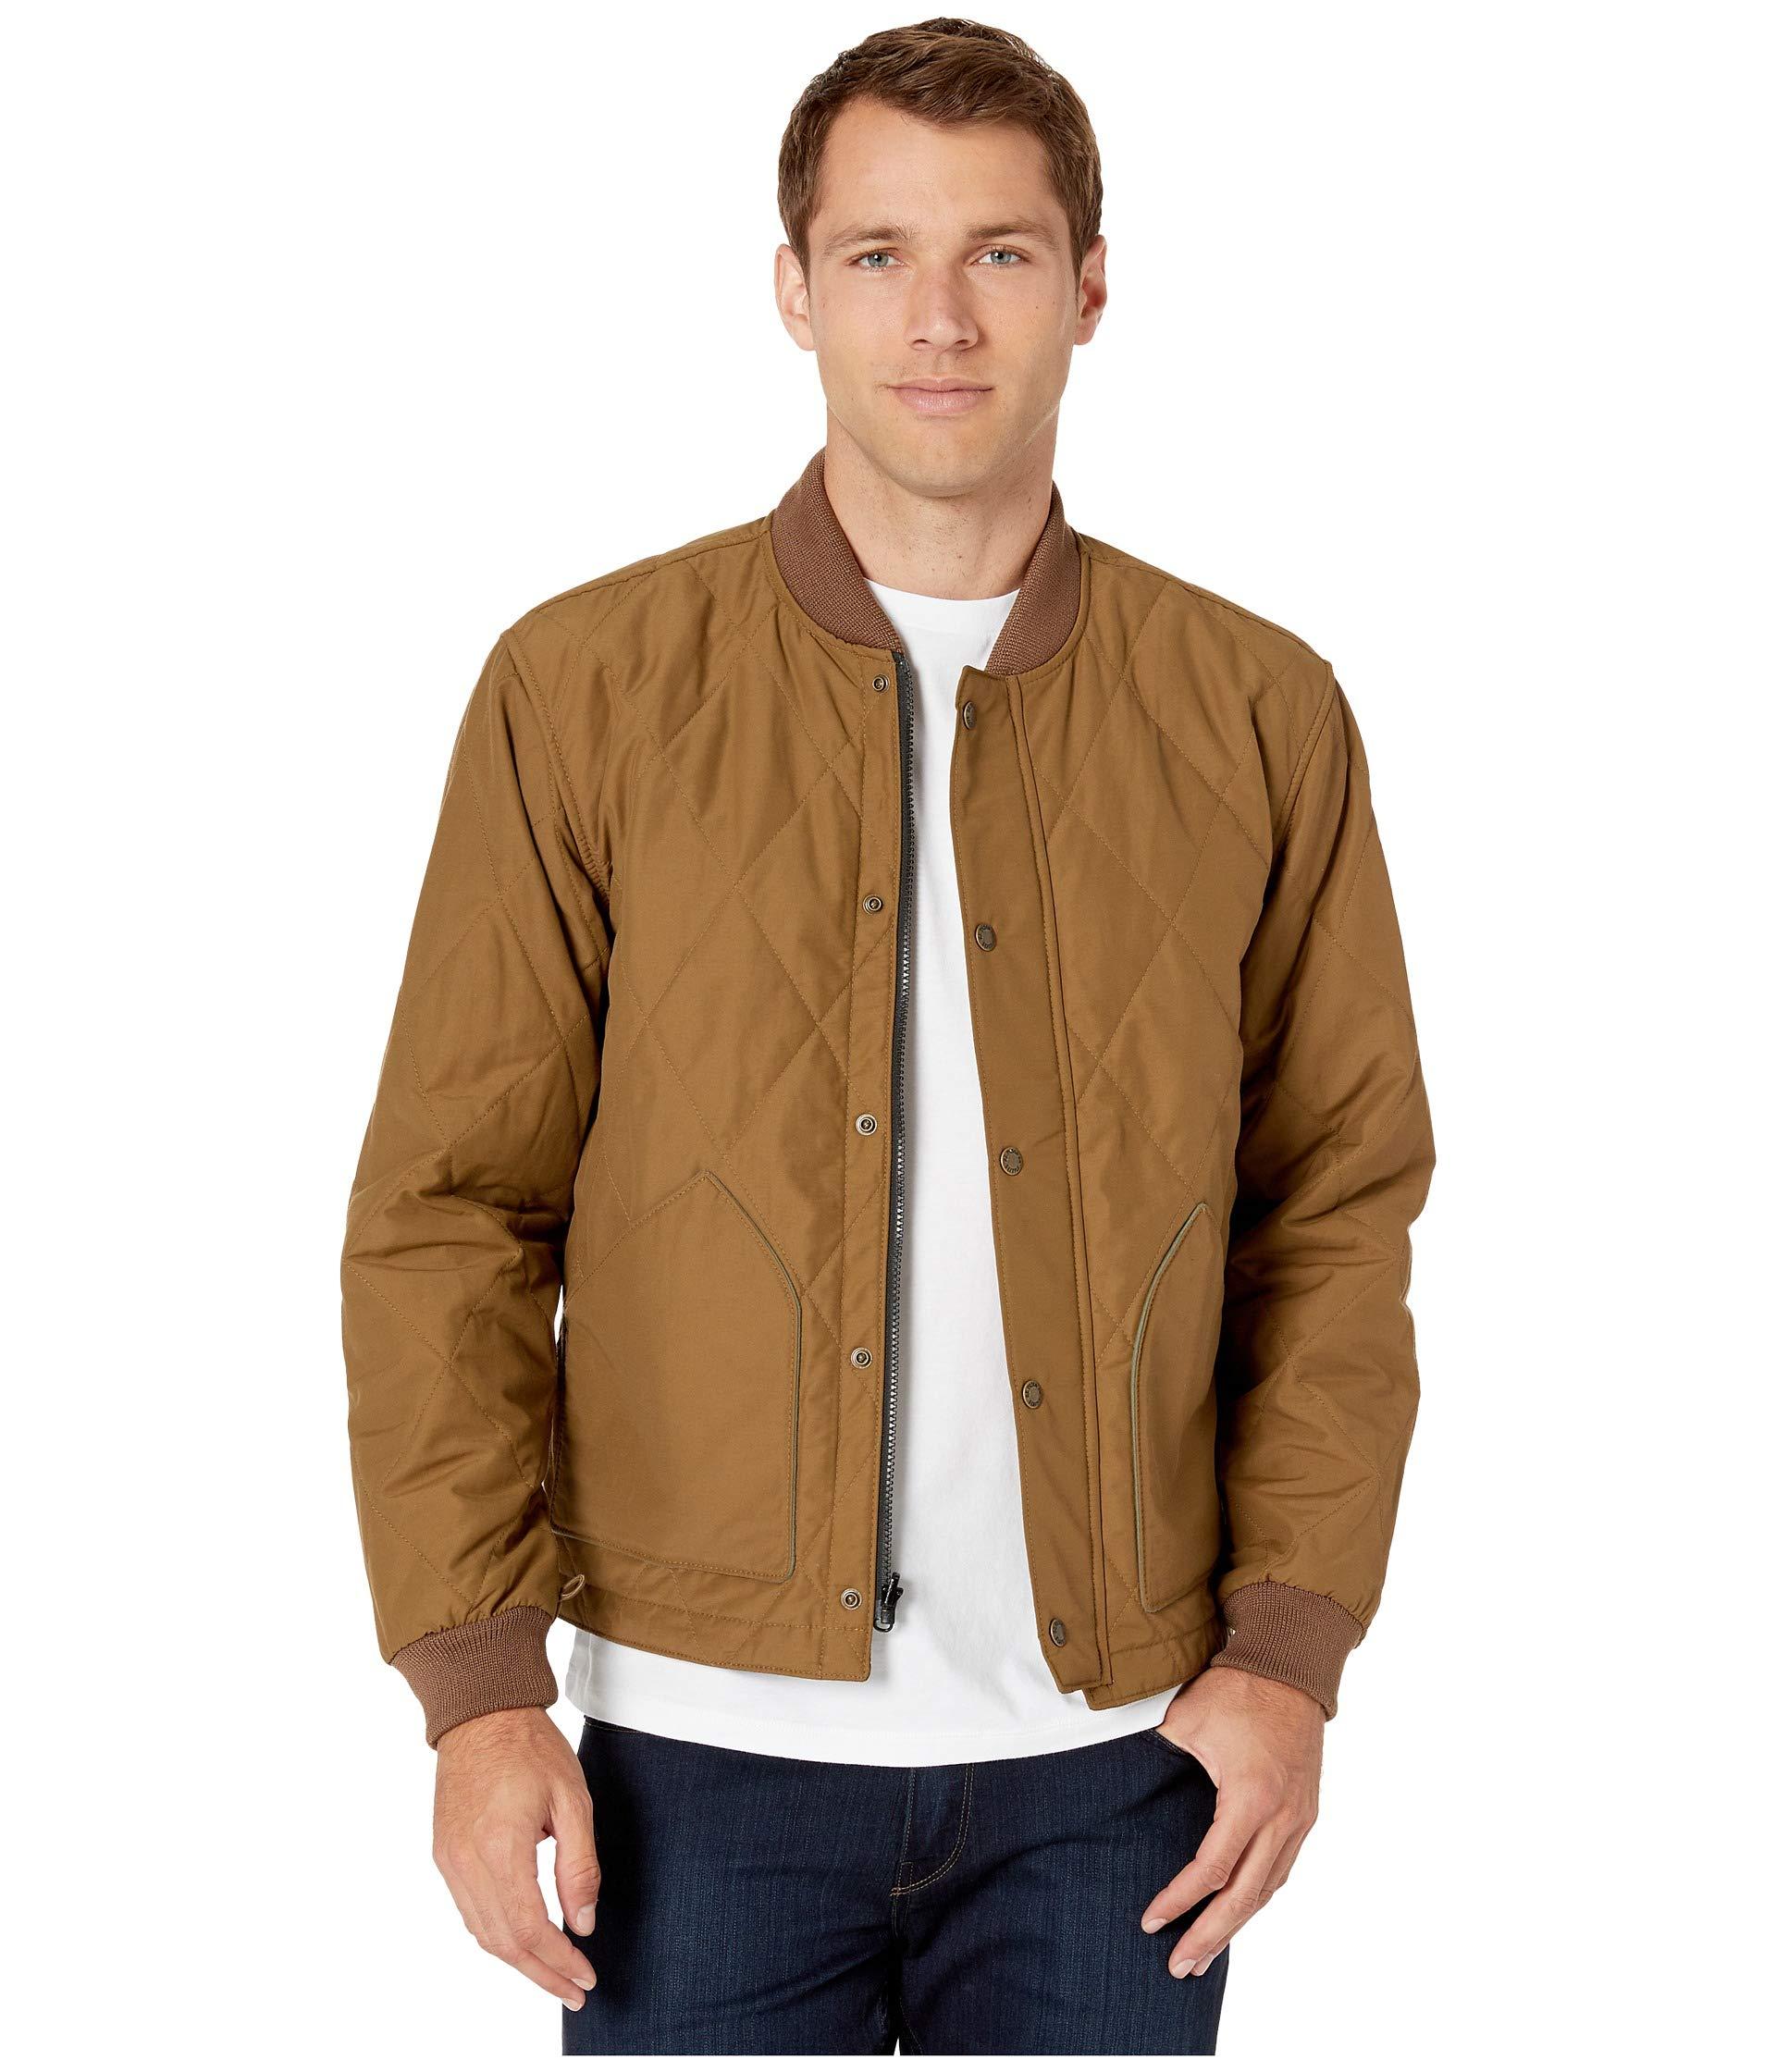 Filson Synthetic Quilted Pack Jacket in Tan (Brown) for Men - Lyst